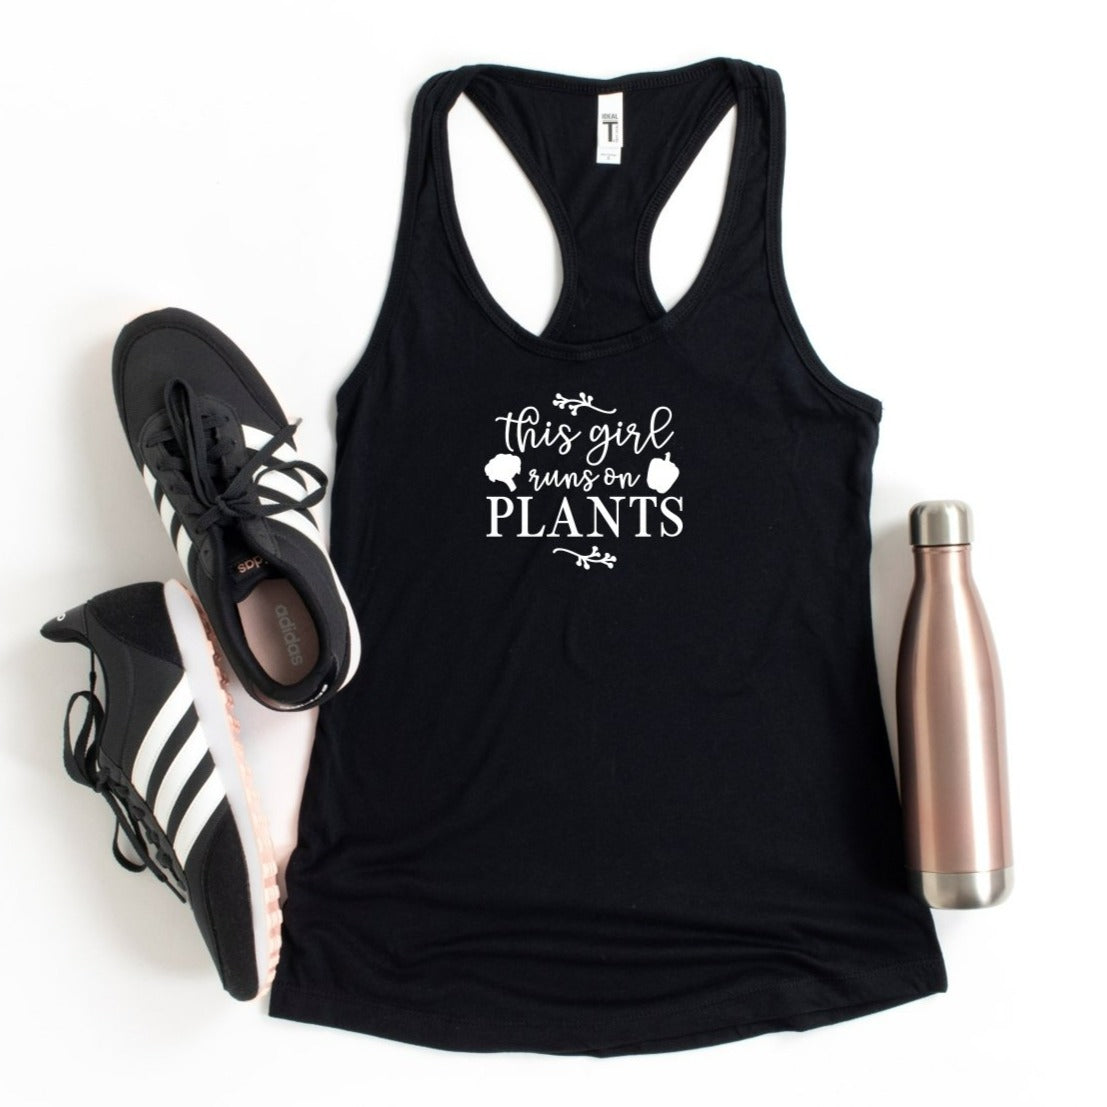 This girl runs on plants in white script on a black Next Level 1533 racerback tank top.